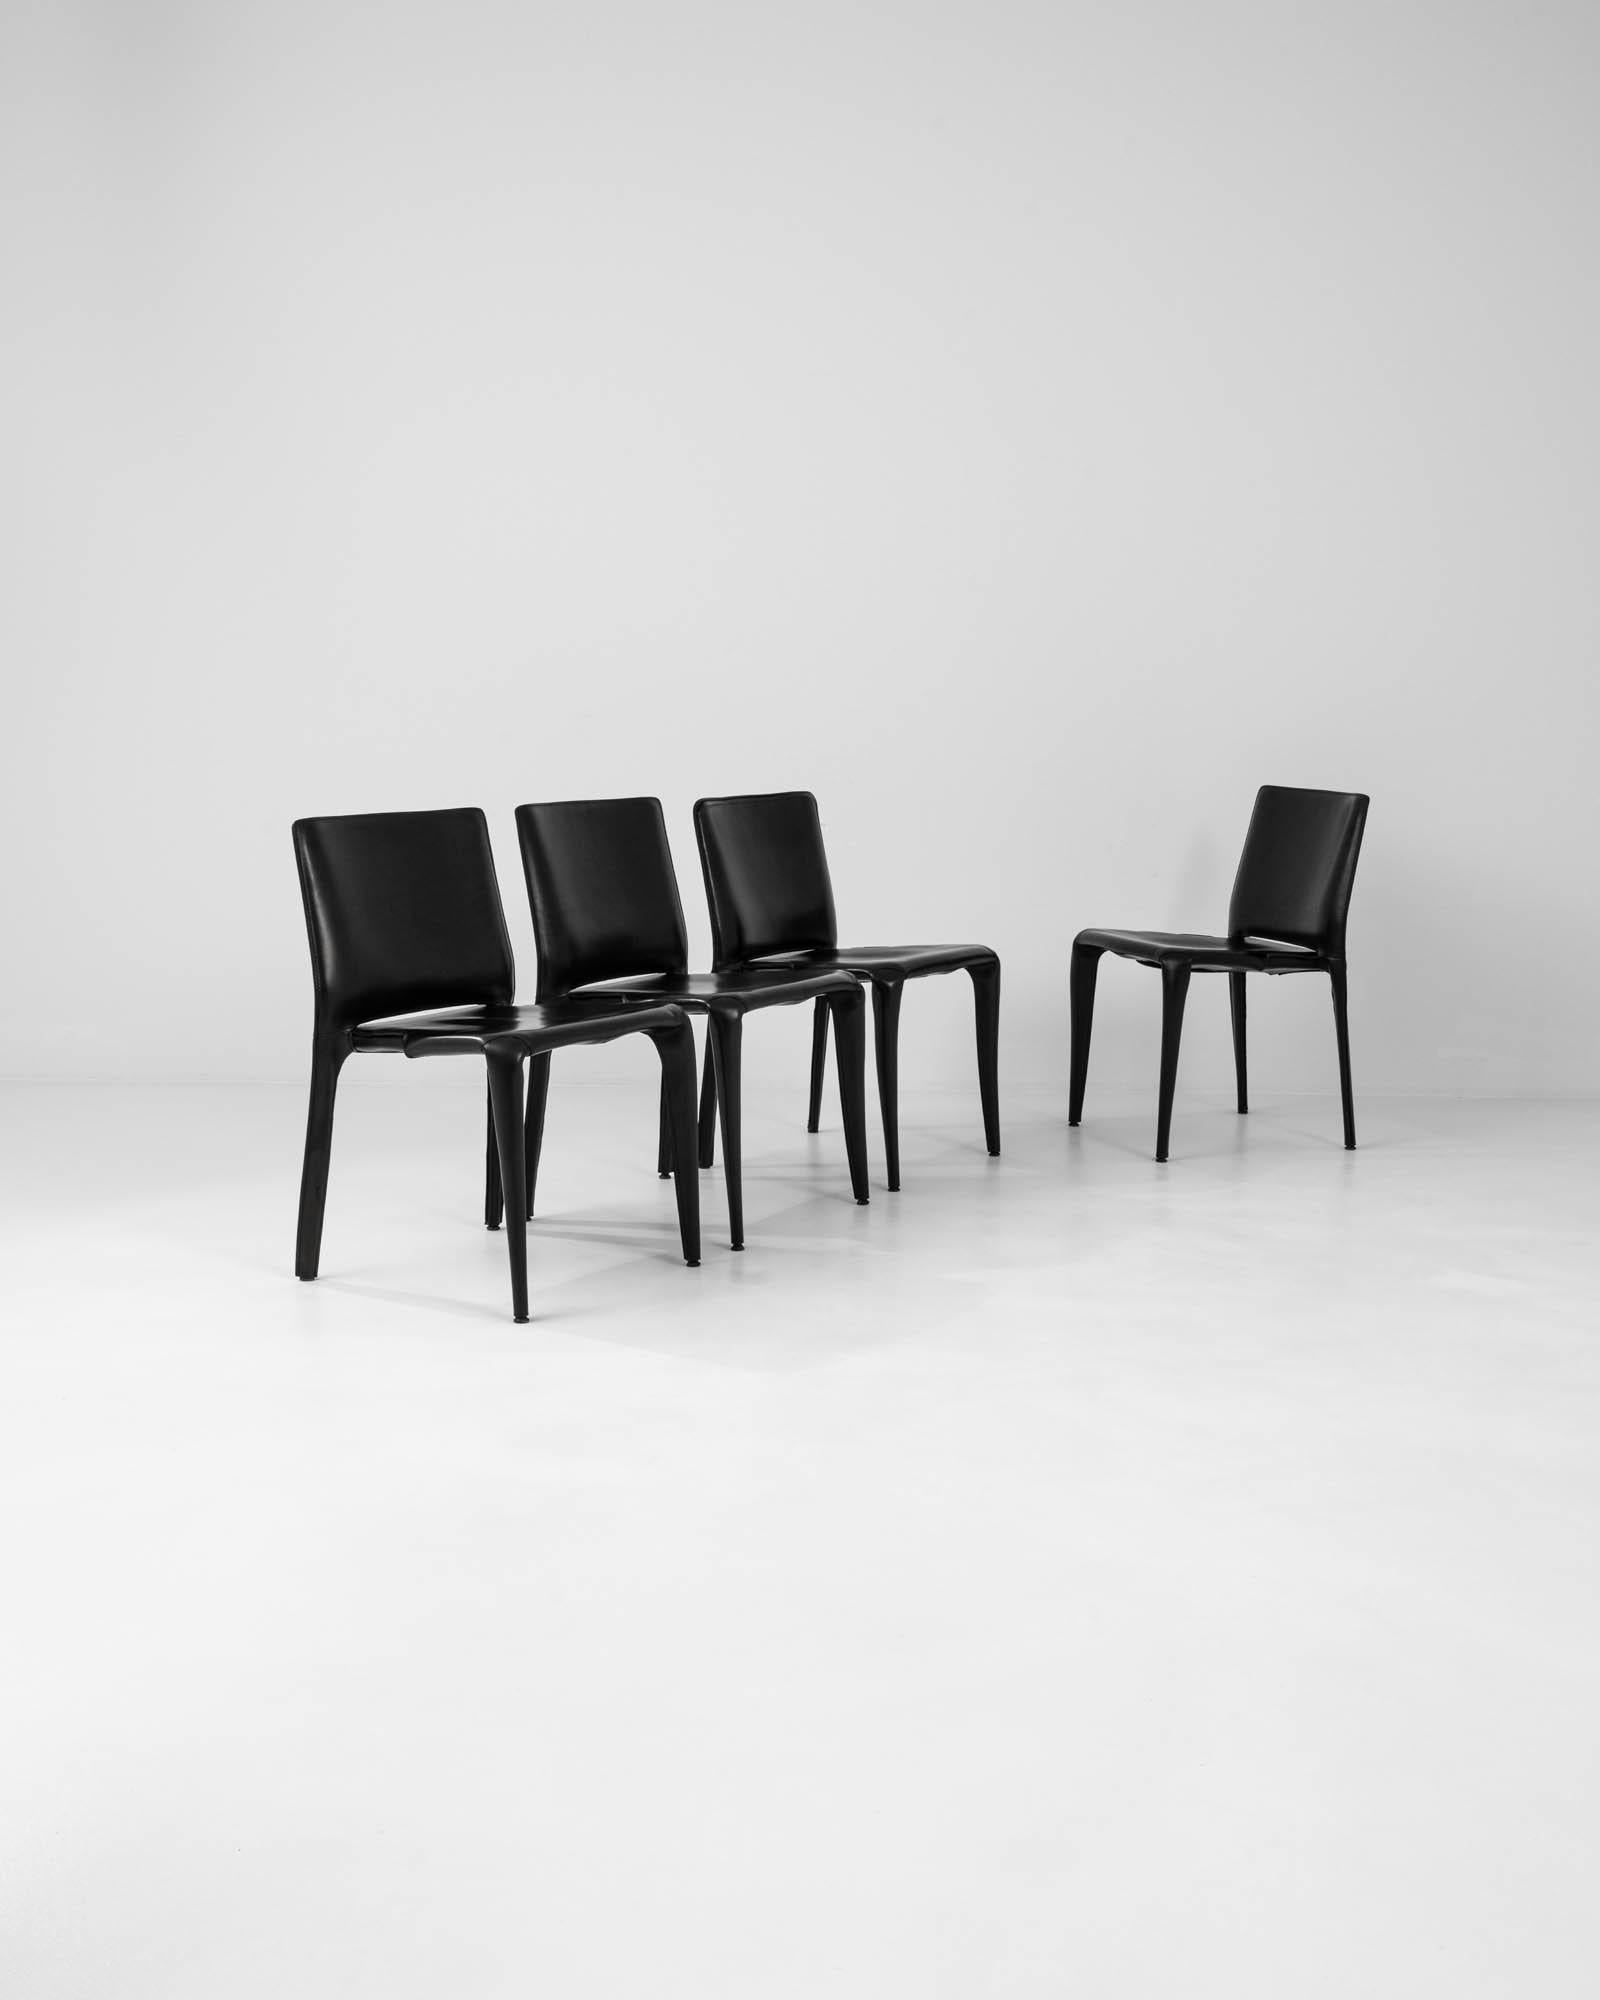 Presenting a unique character, these ‘Bull’ chairs by noted designer Mario Bellini serve equally by the dining table, or as visual accent pieces. Precisely stitched leather draws the material tight to provide a taut and neatly smooth surface. Sleek,